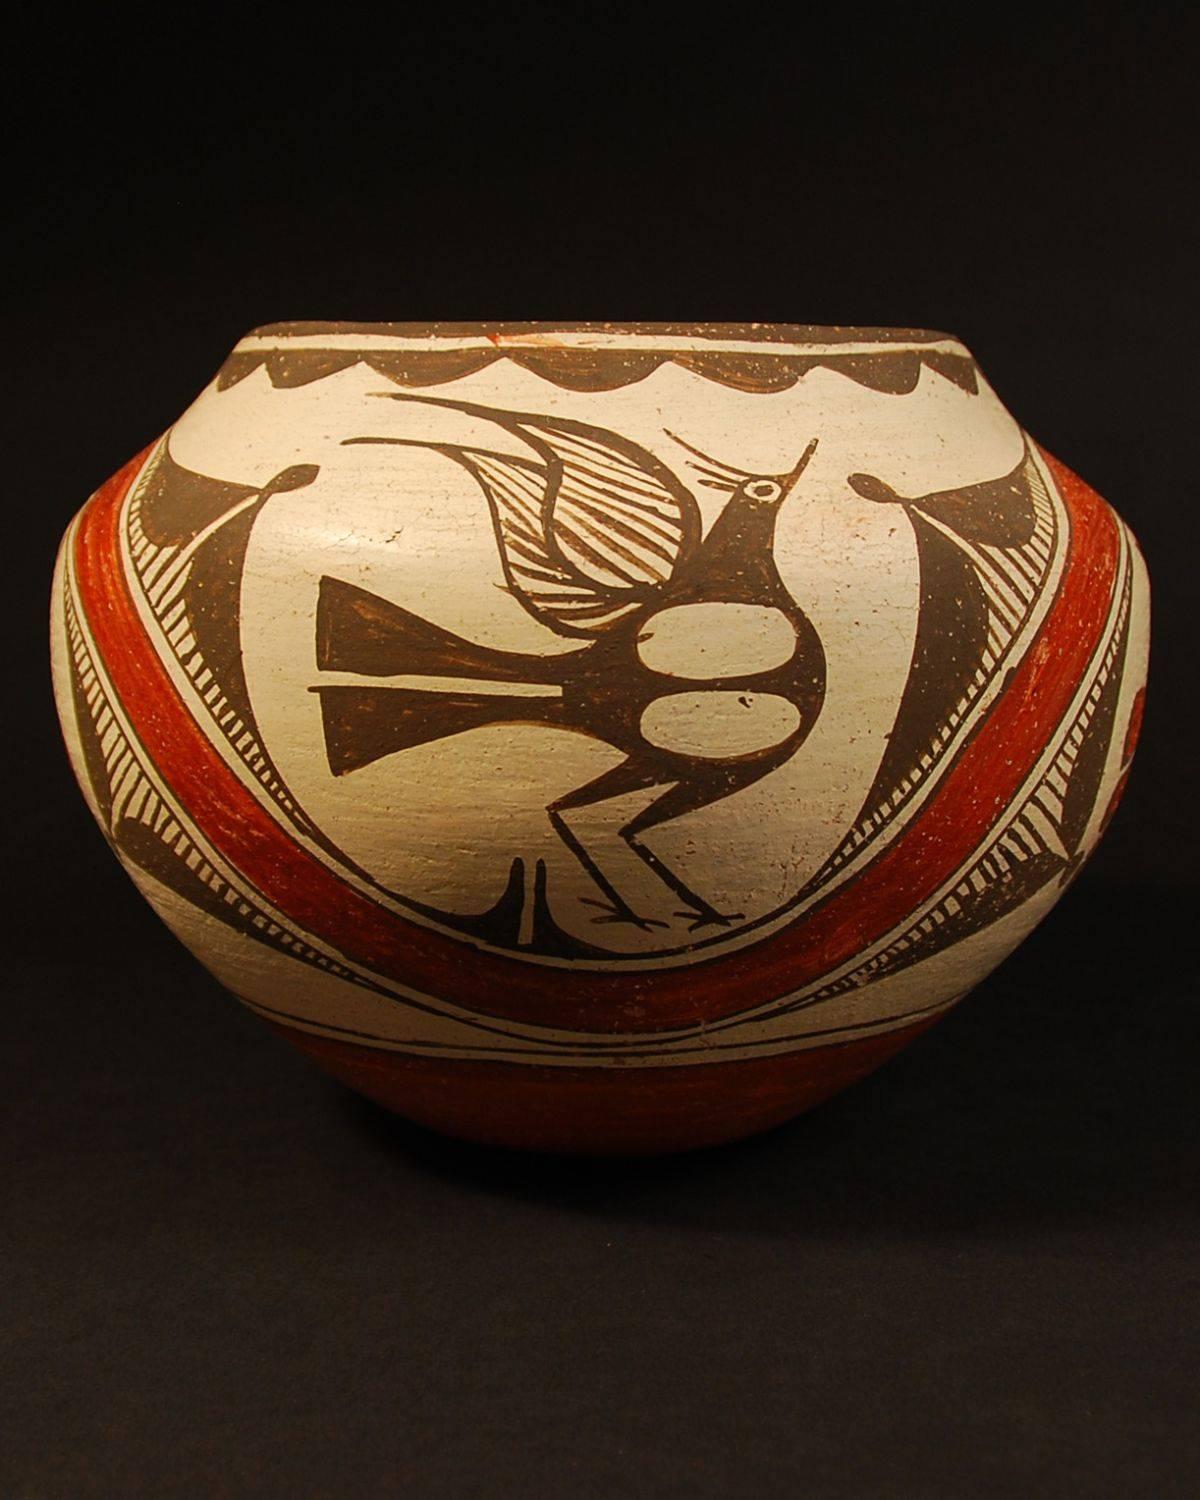 Offered by Callie Morgan Oakes 
Circa 1950s Native American Indian tribal pot
Seferina Bell, Zia Pueblo, New Mexico

This is a classic Seferina Zia jar with her distinct double tailed Zia bird which Harlow and Lanmon in The Pottery of Zia